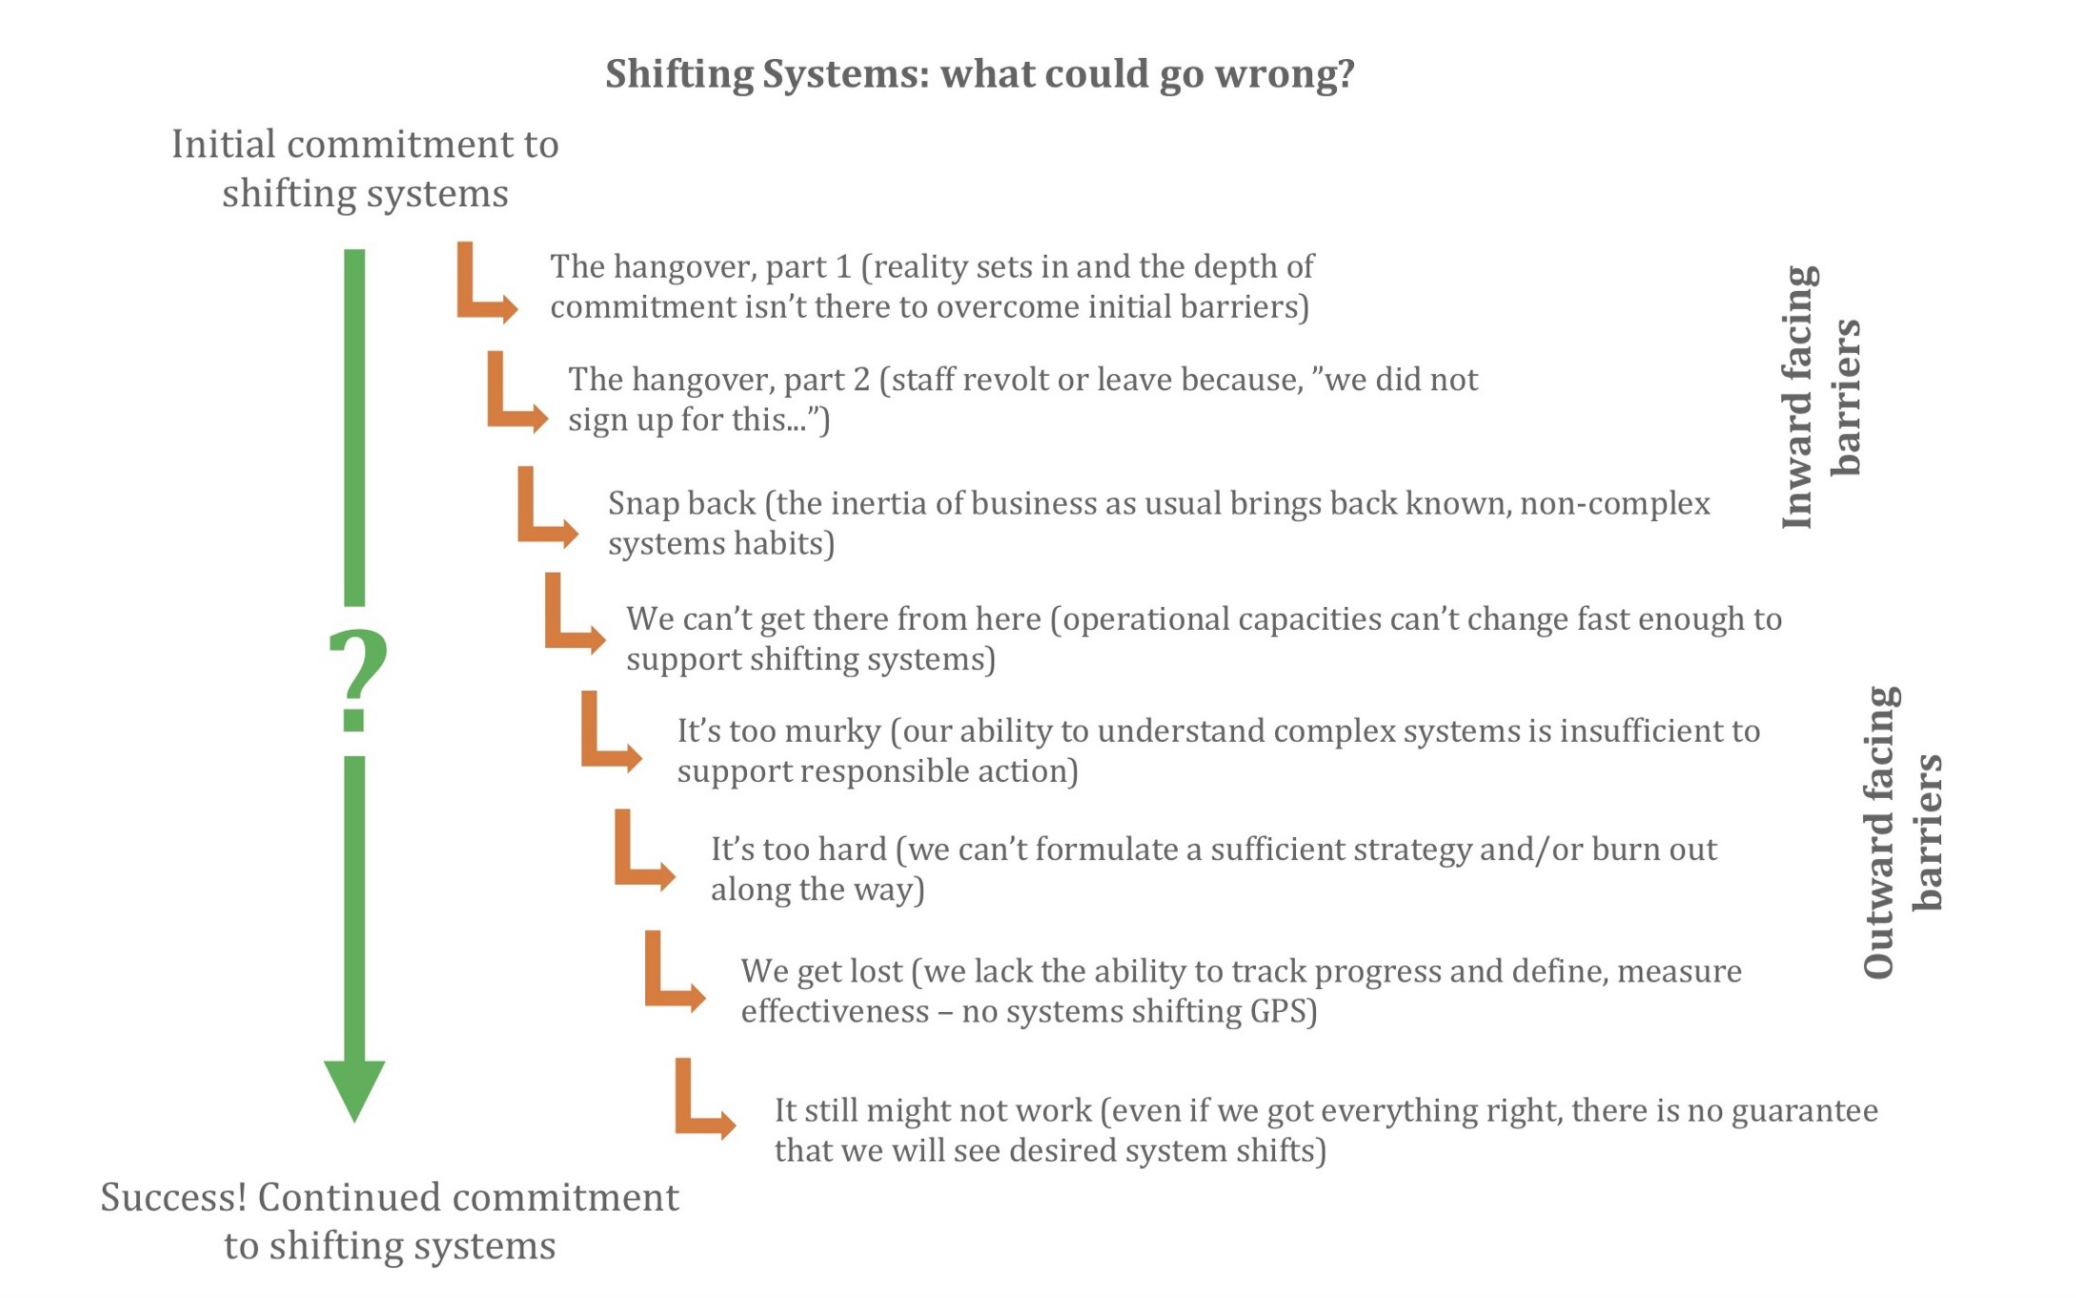 Shifting systems - what could go wrong